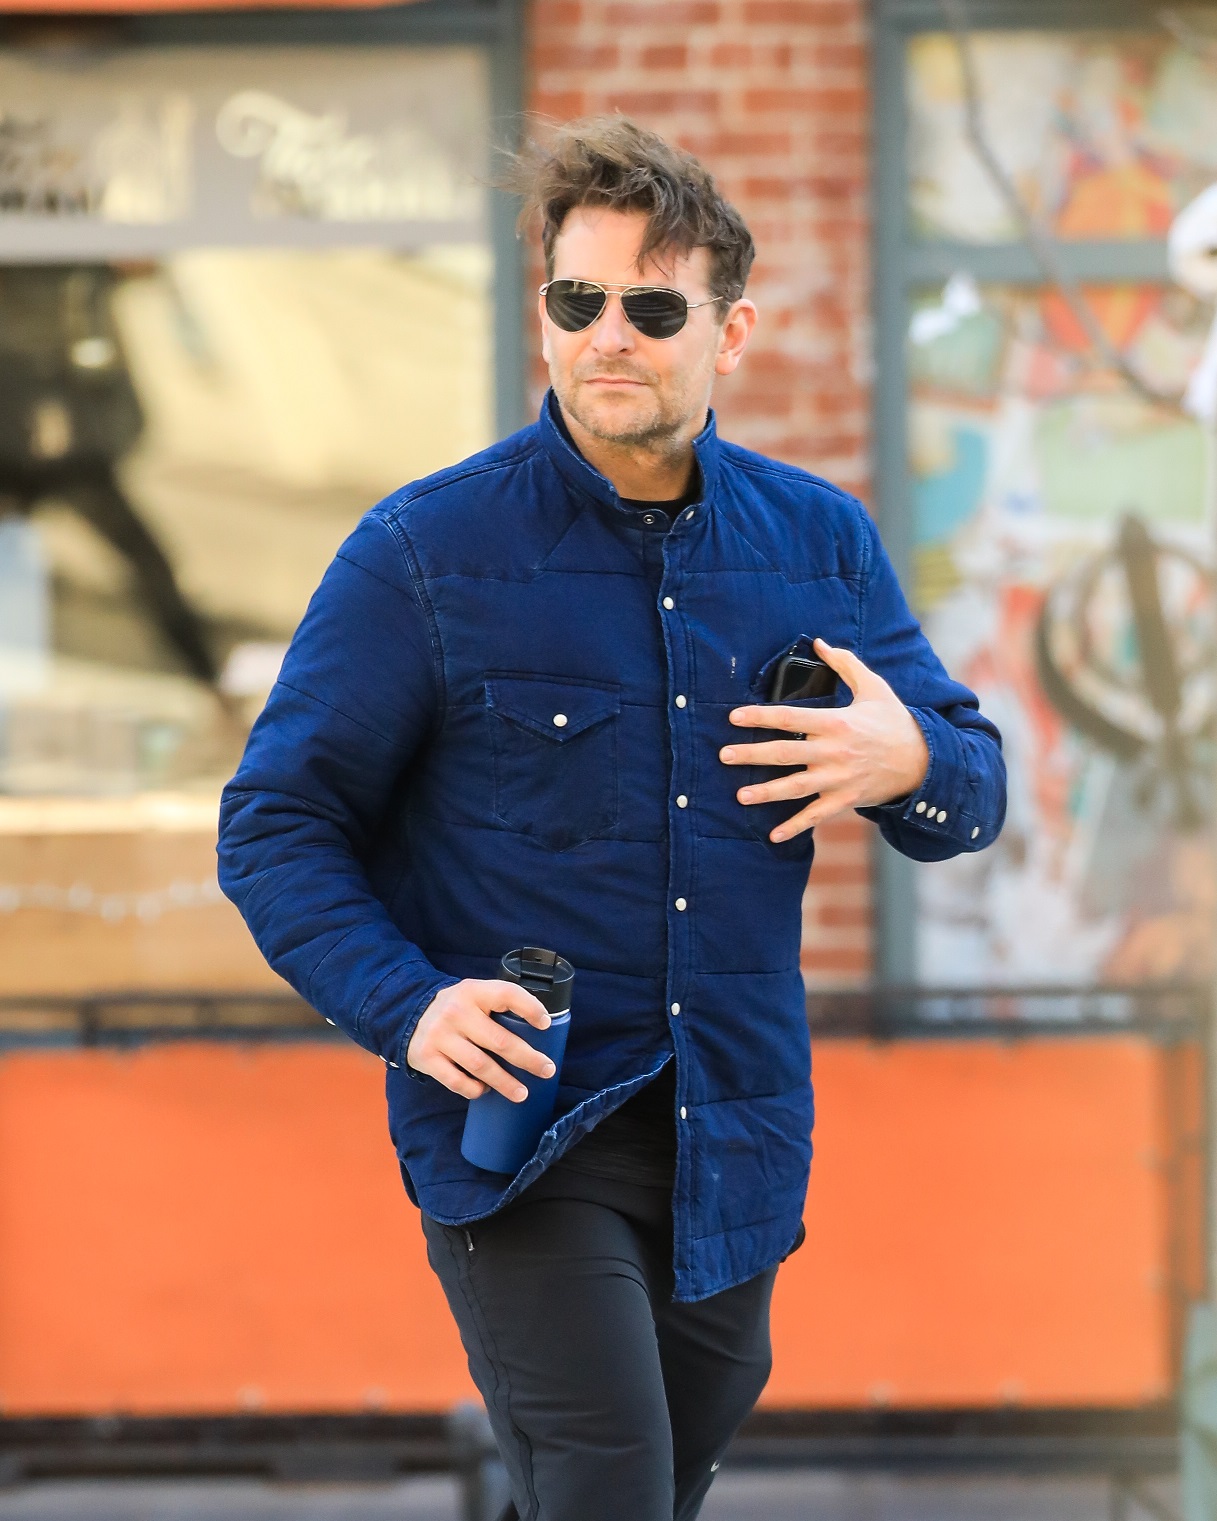 03/04/2020 Bradley Cooper is spotted heading to gym for a morning workout session in New York City. The 45 year old actor wore a black jacket, dark trousers, and matching sneakers.,Image: 503172235, License: Rights-managed, Restrictions: NO usage without agreed price and terms. Please contact sales@theimagedirect.com, Model Release: no, Credit line: TheImageDirect.com / The Image Direct / Profimedia